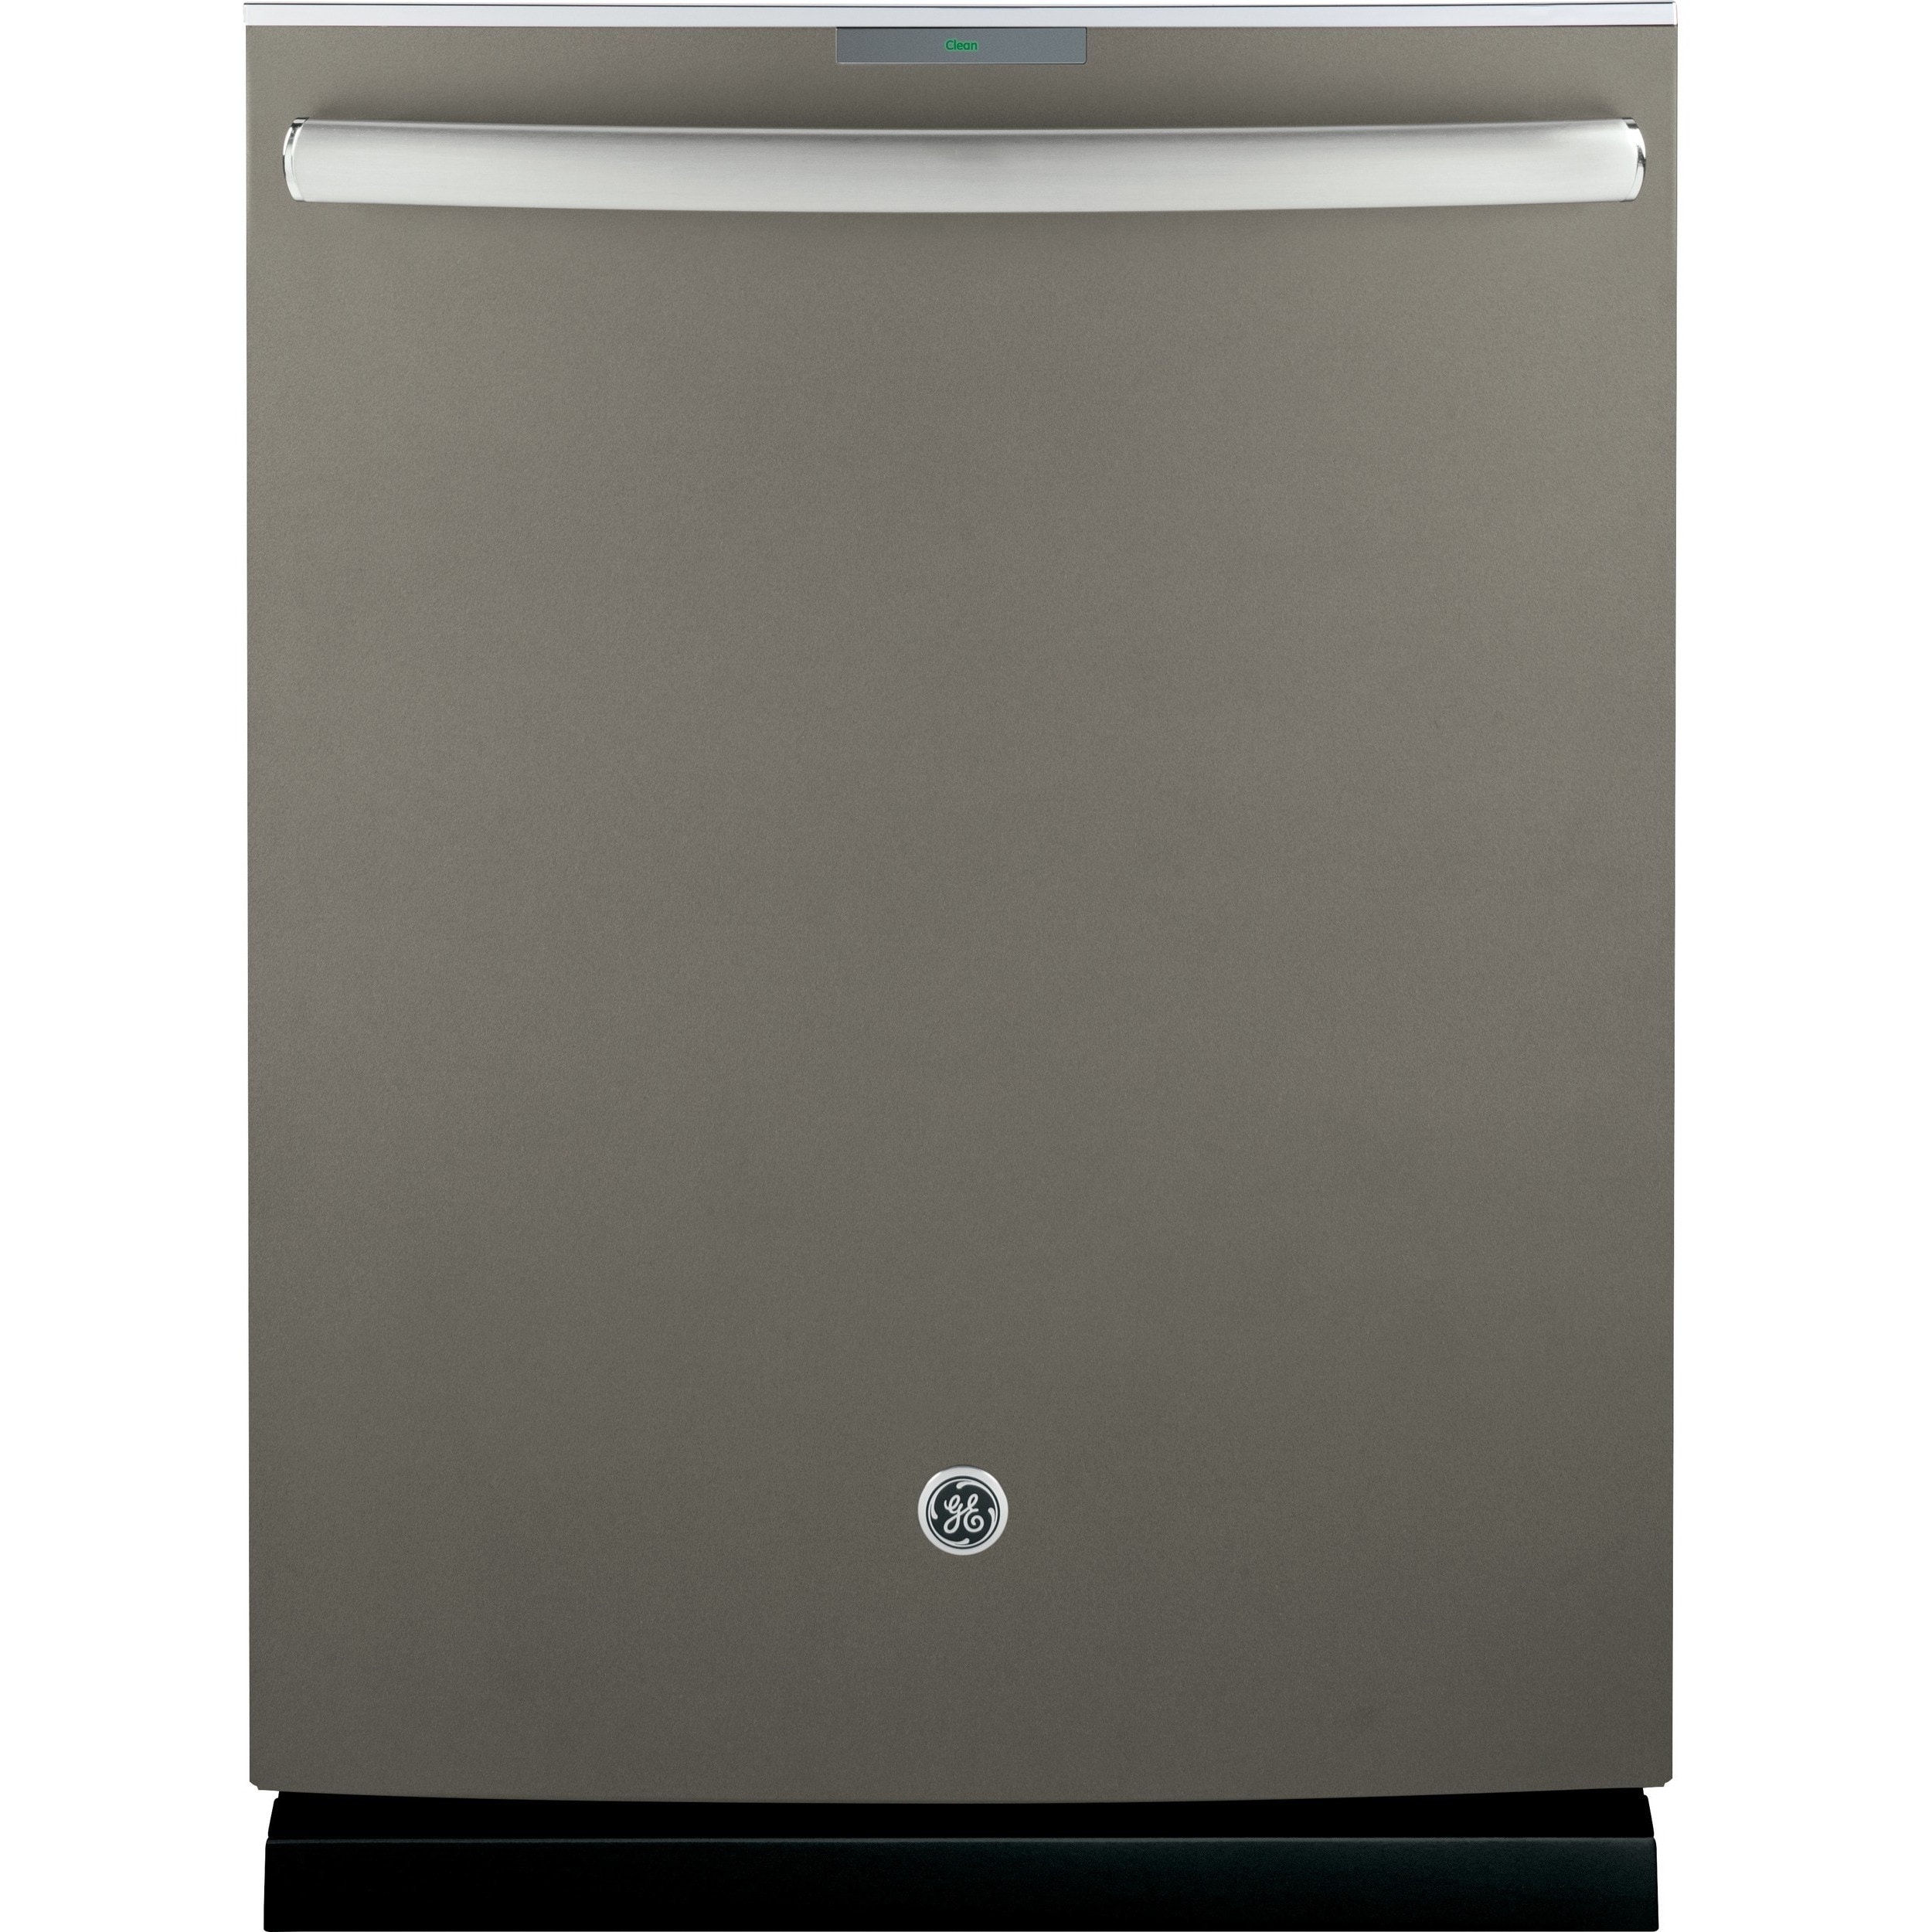 Details About Ge Profile Stainless Steel Interior Dishwasher With Hidden Silver